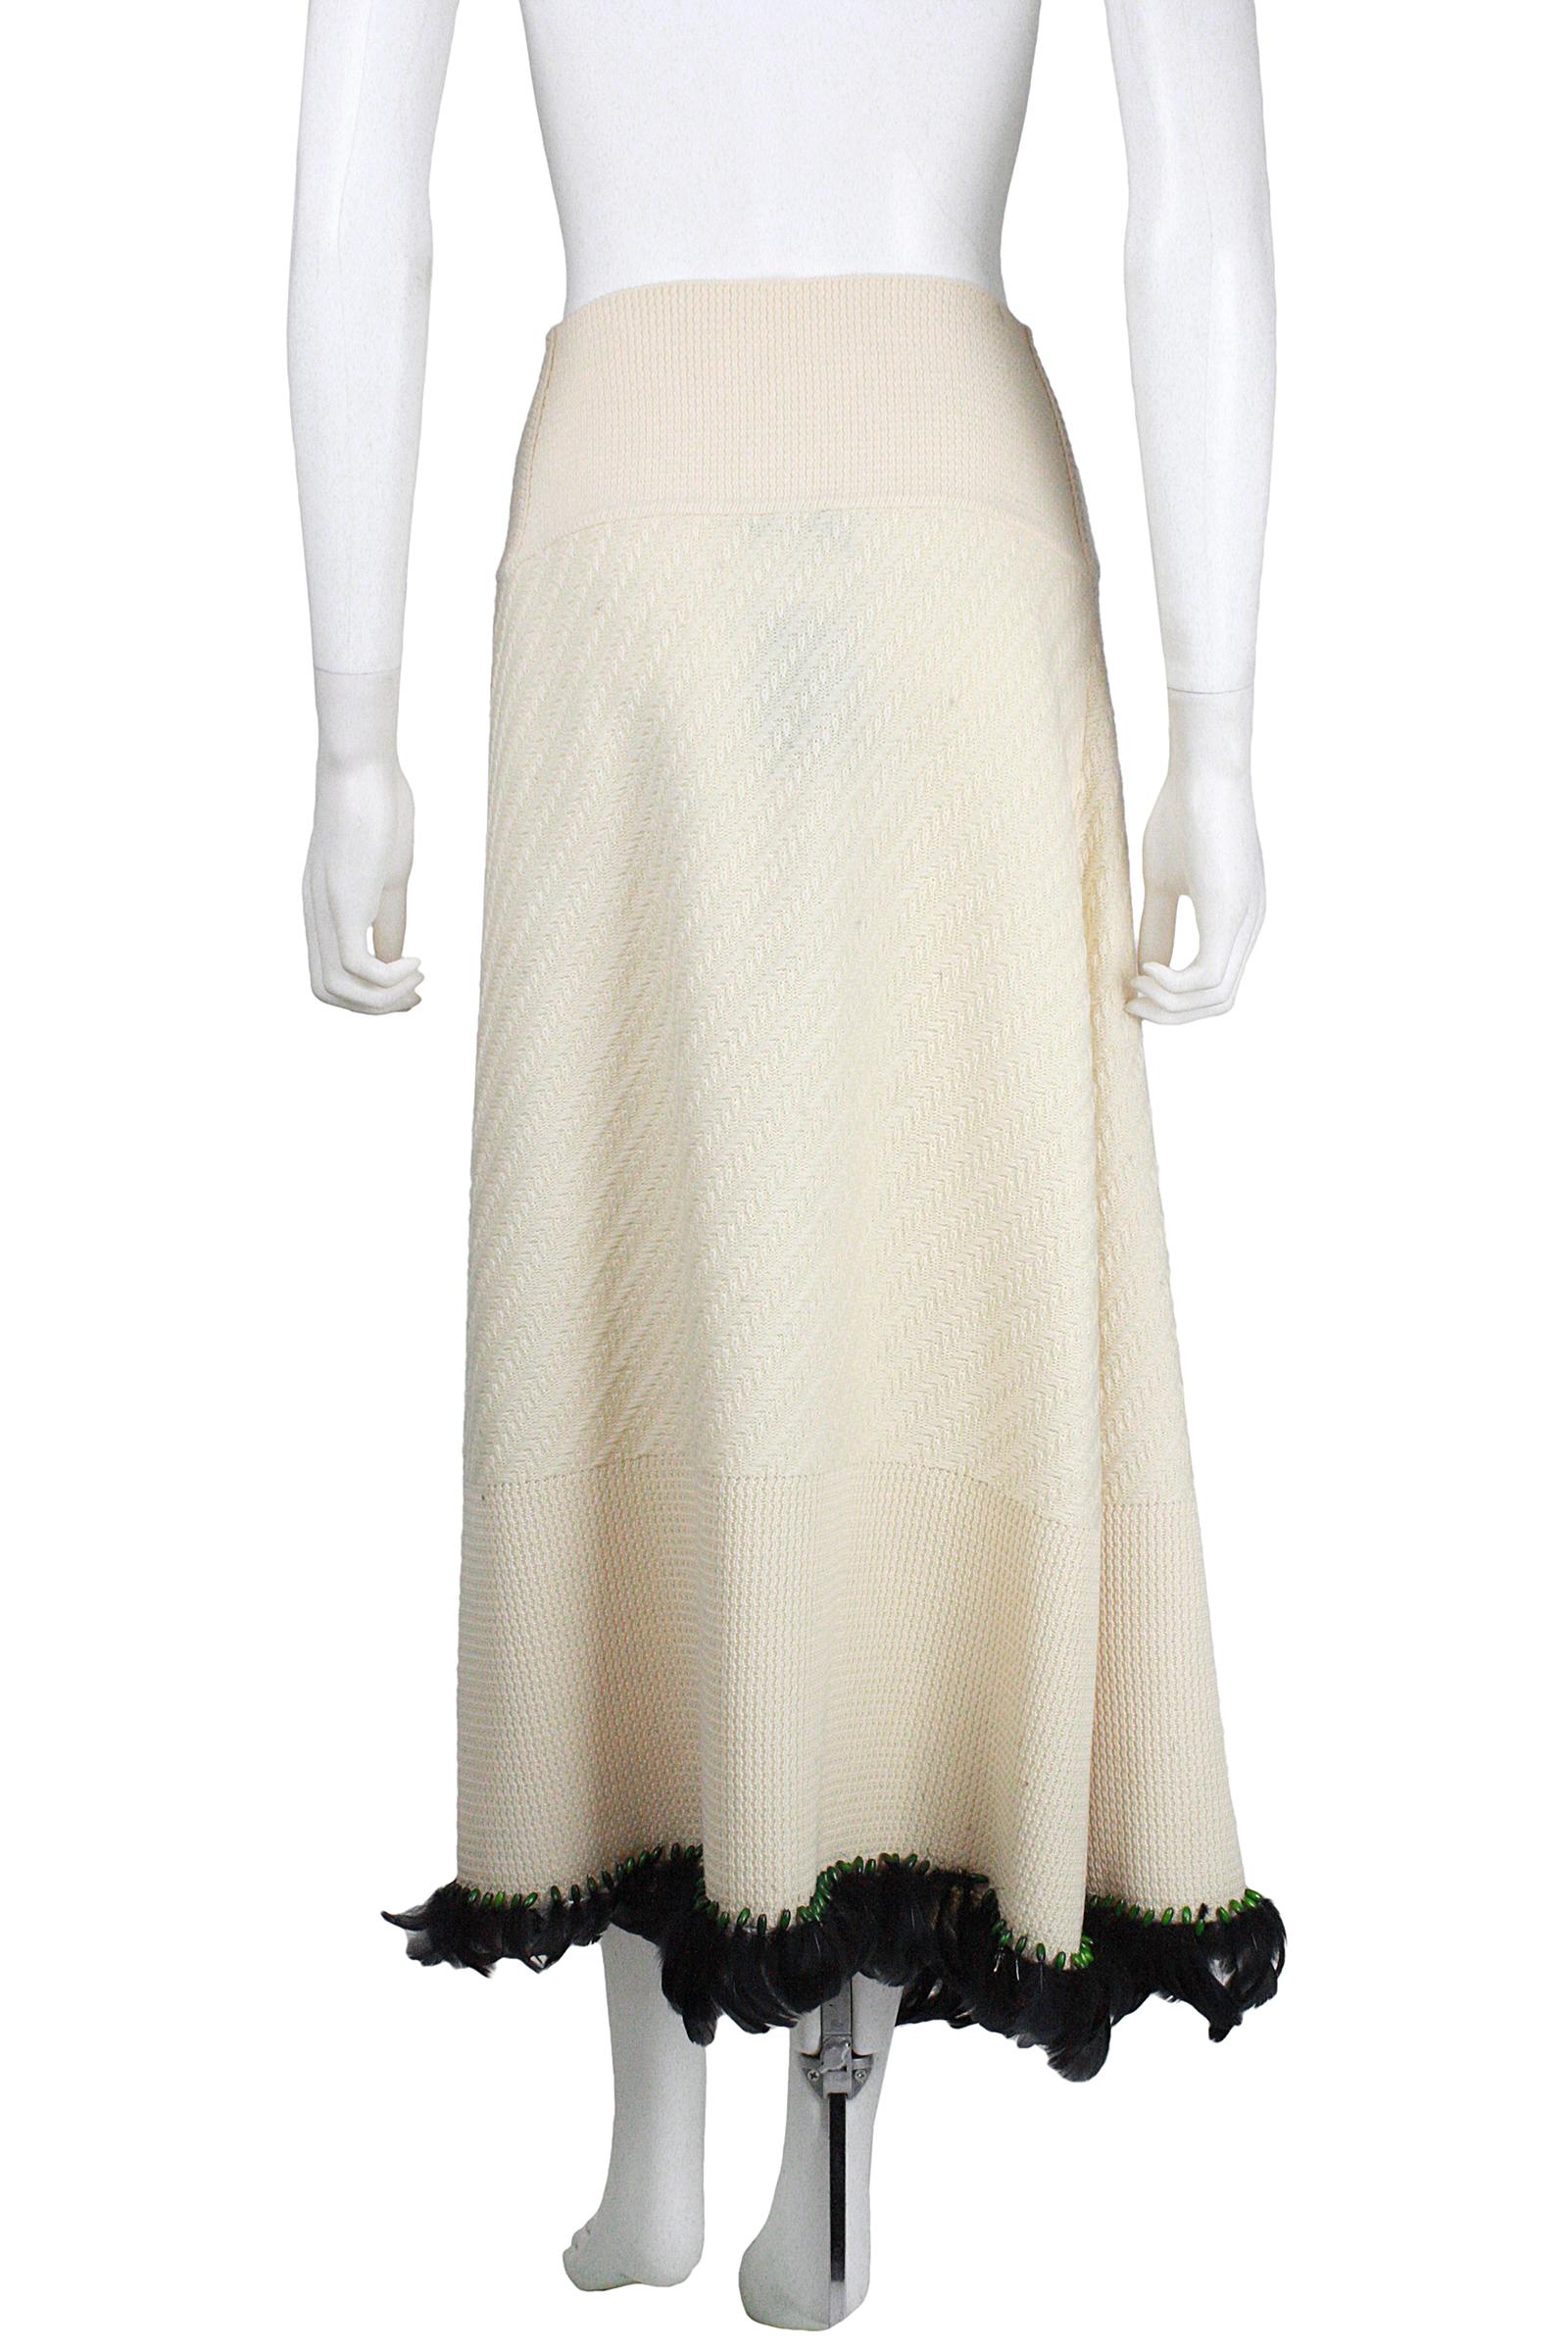 1990s John Galliano Cream Knit Wrap Skirt with Green Beads and Black Feathers 2